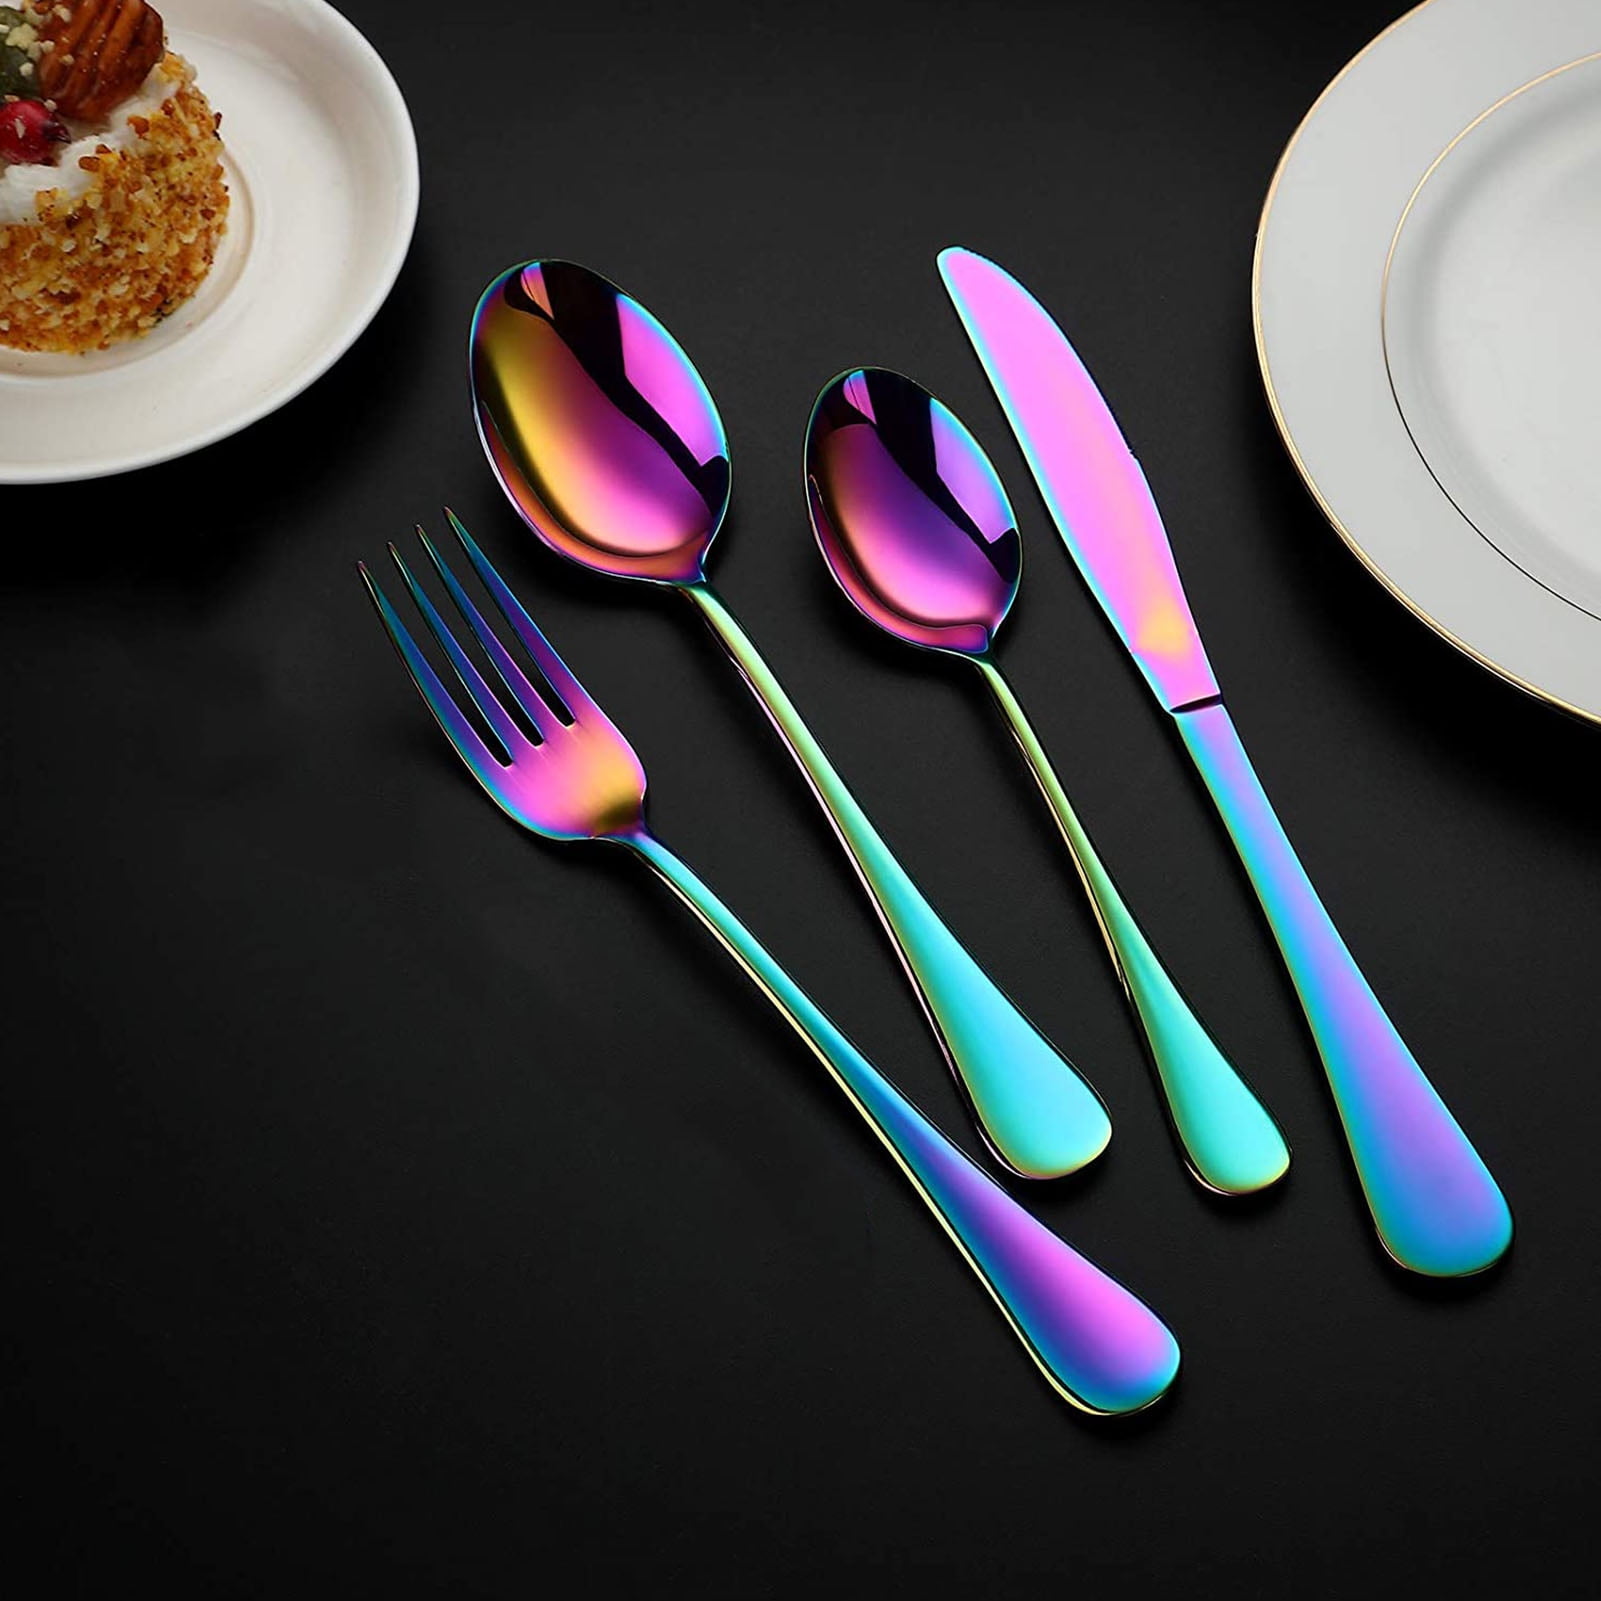 Iridescent Cutlery Utensils Set Service for 4 Dishwasher Safe 20-Piece Stainless Steel Rainbow Flatware Set Muticolorful Colorful Silverware Set Mirror Polished 